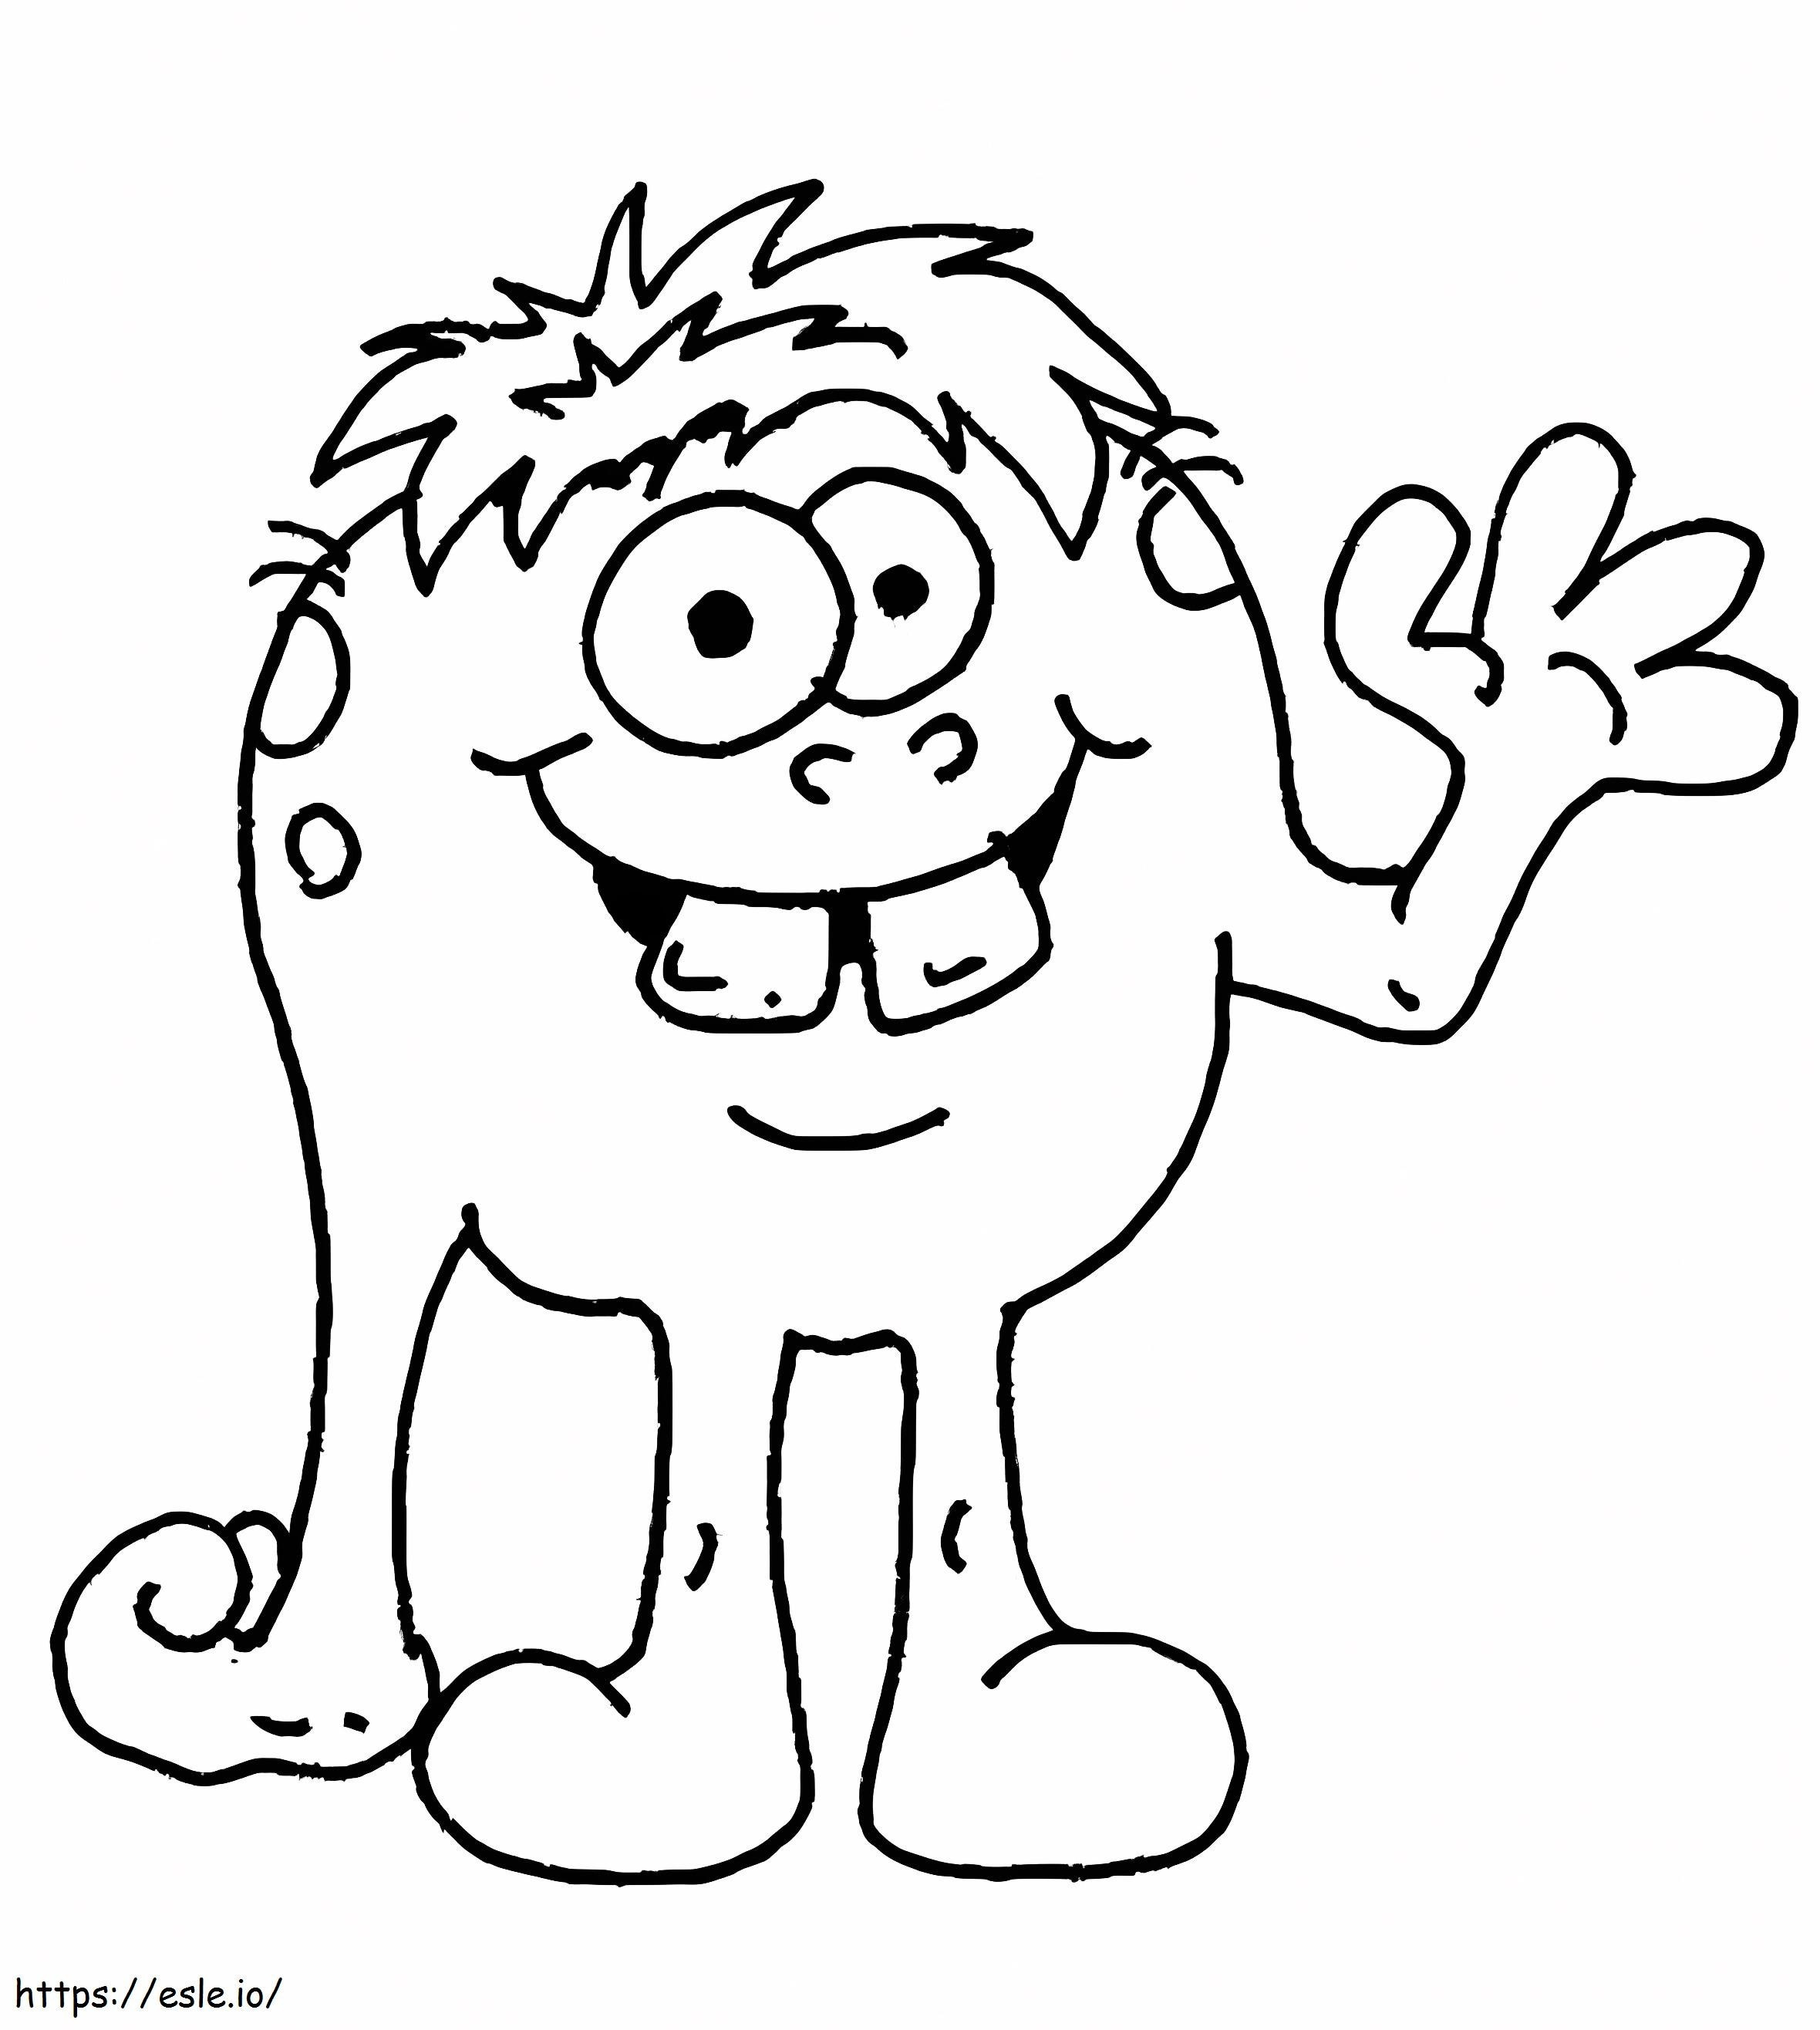 Monster Free Images coloring page